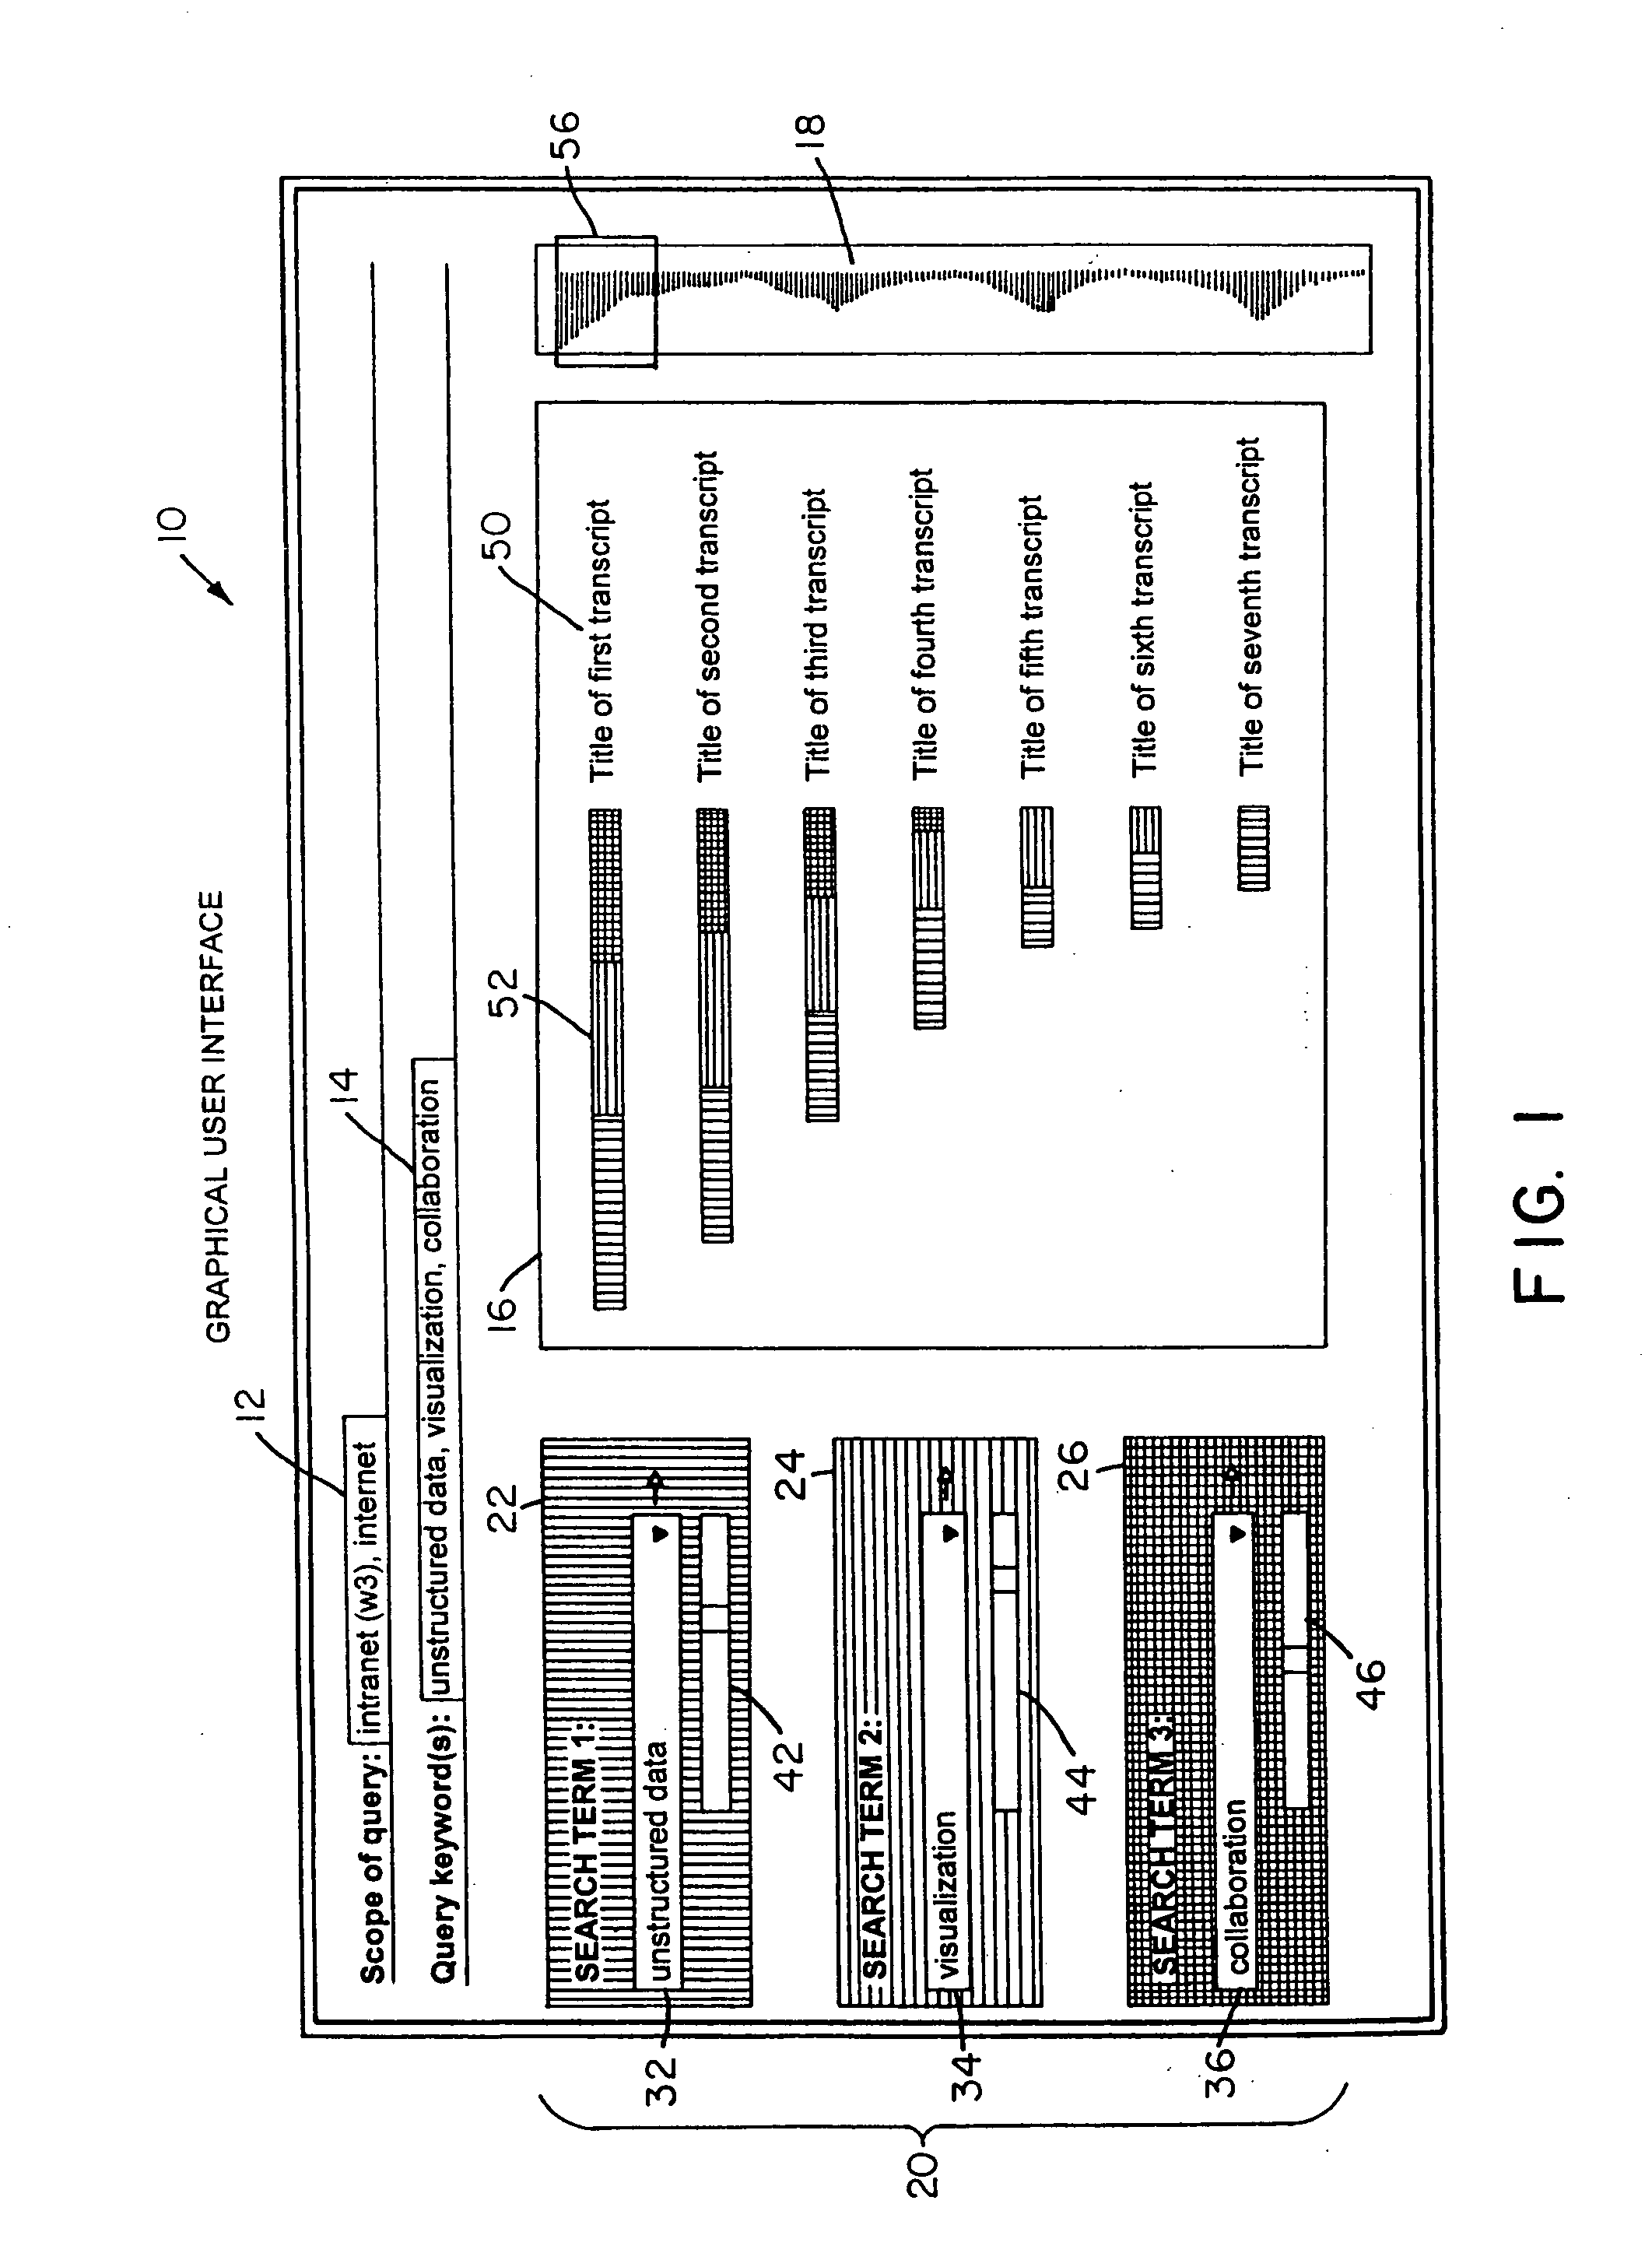 Method, system, and article to provide data analysis or searching